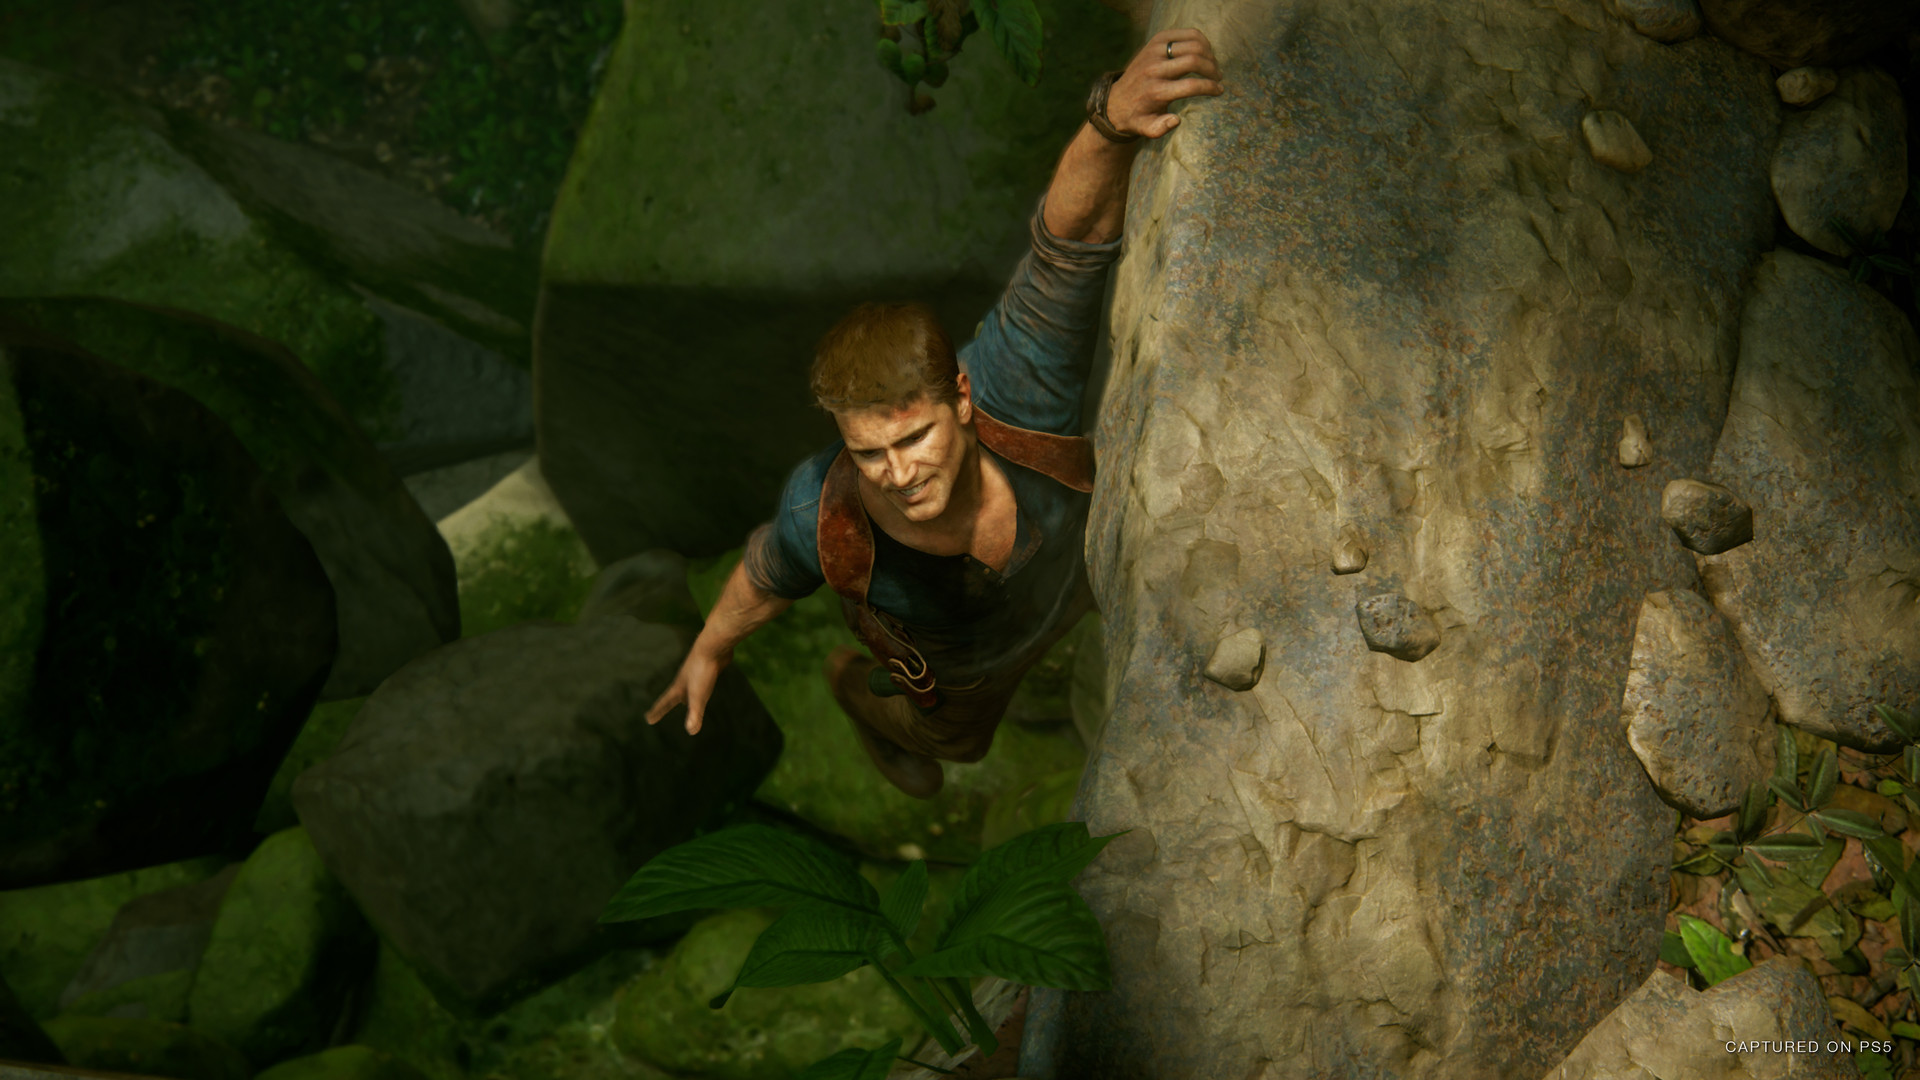 Uncharted The Naughty Dog PC Collection slated for a September 6